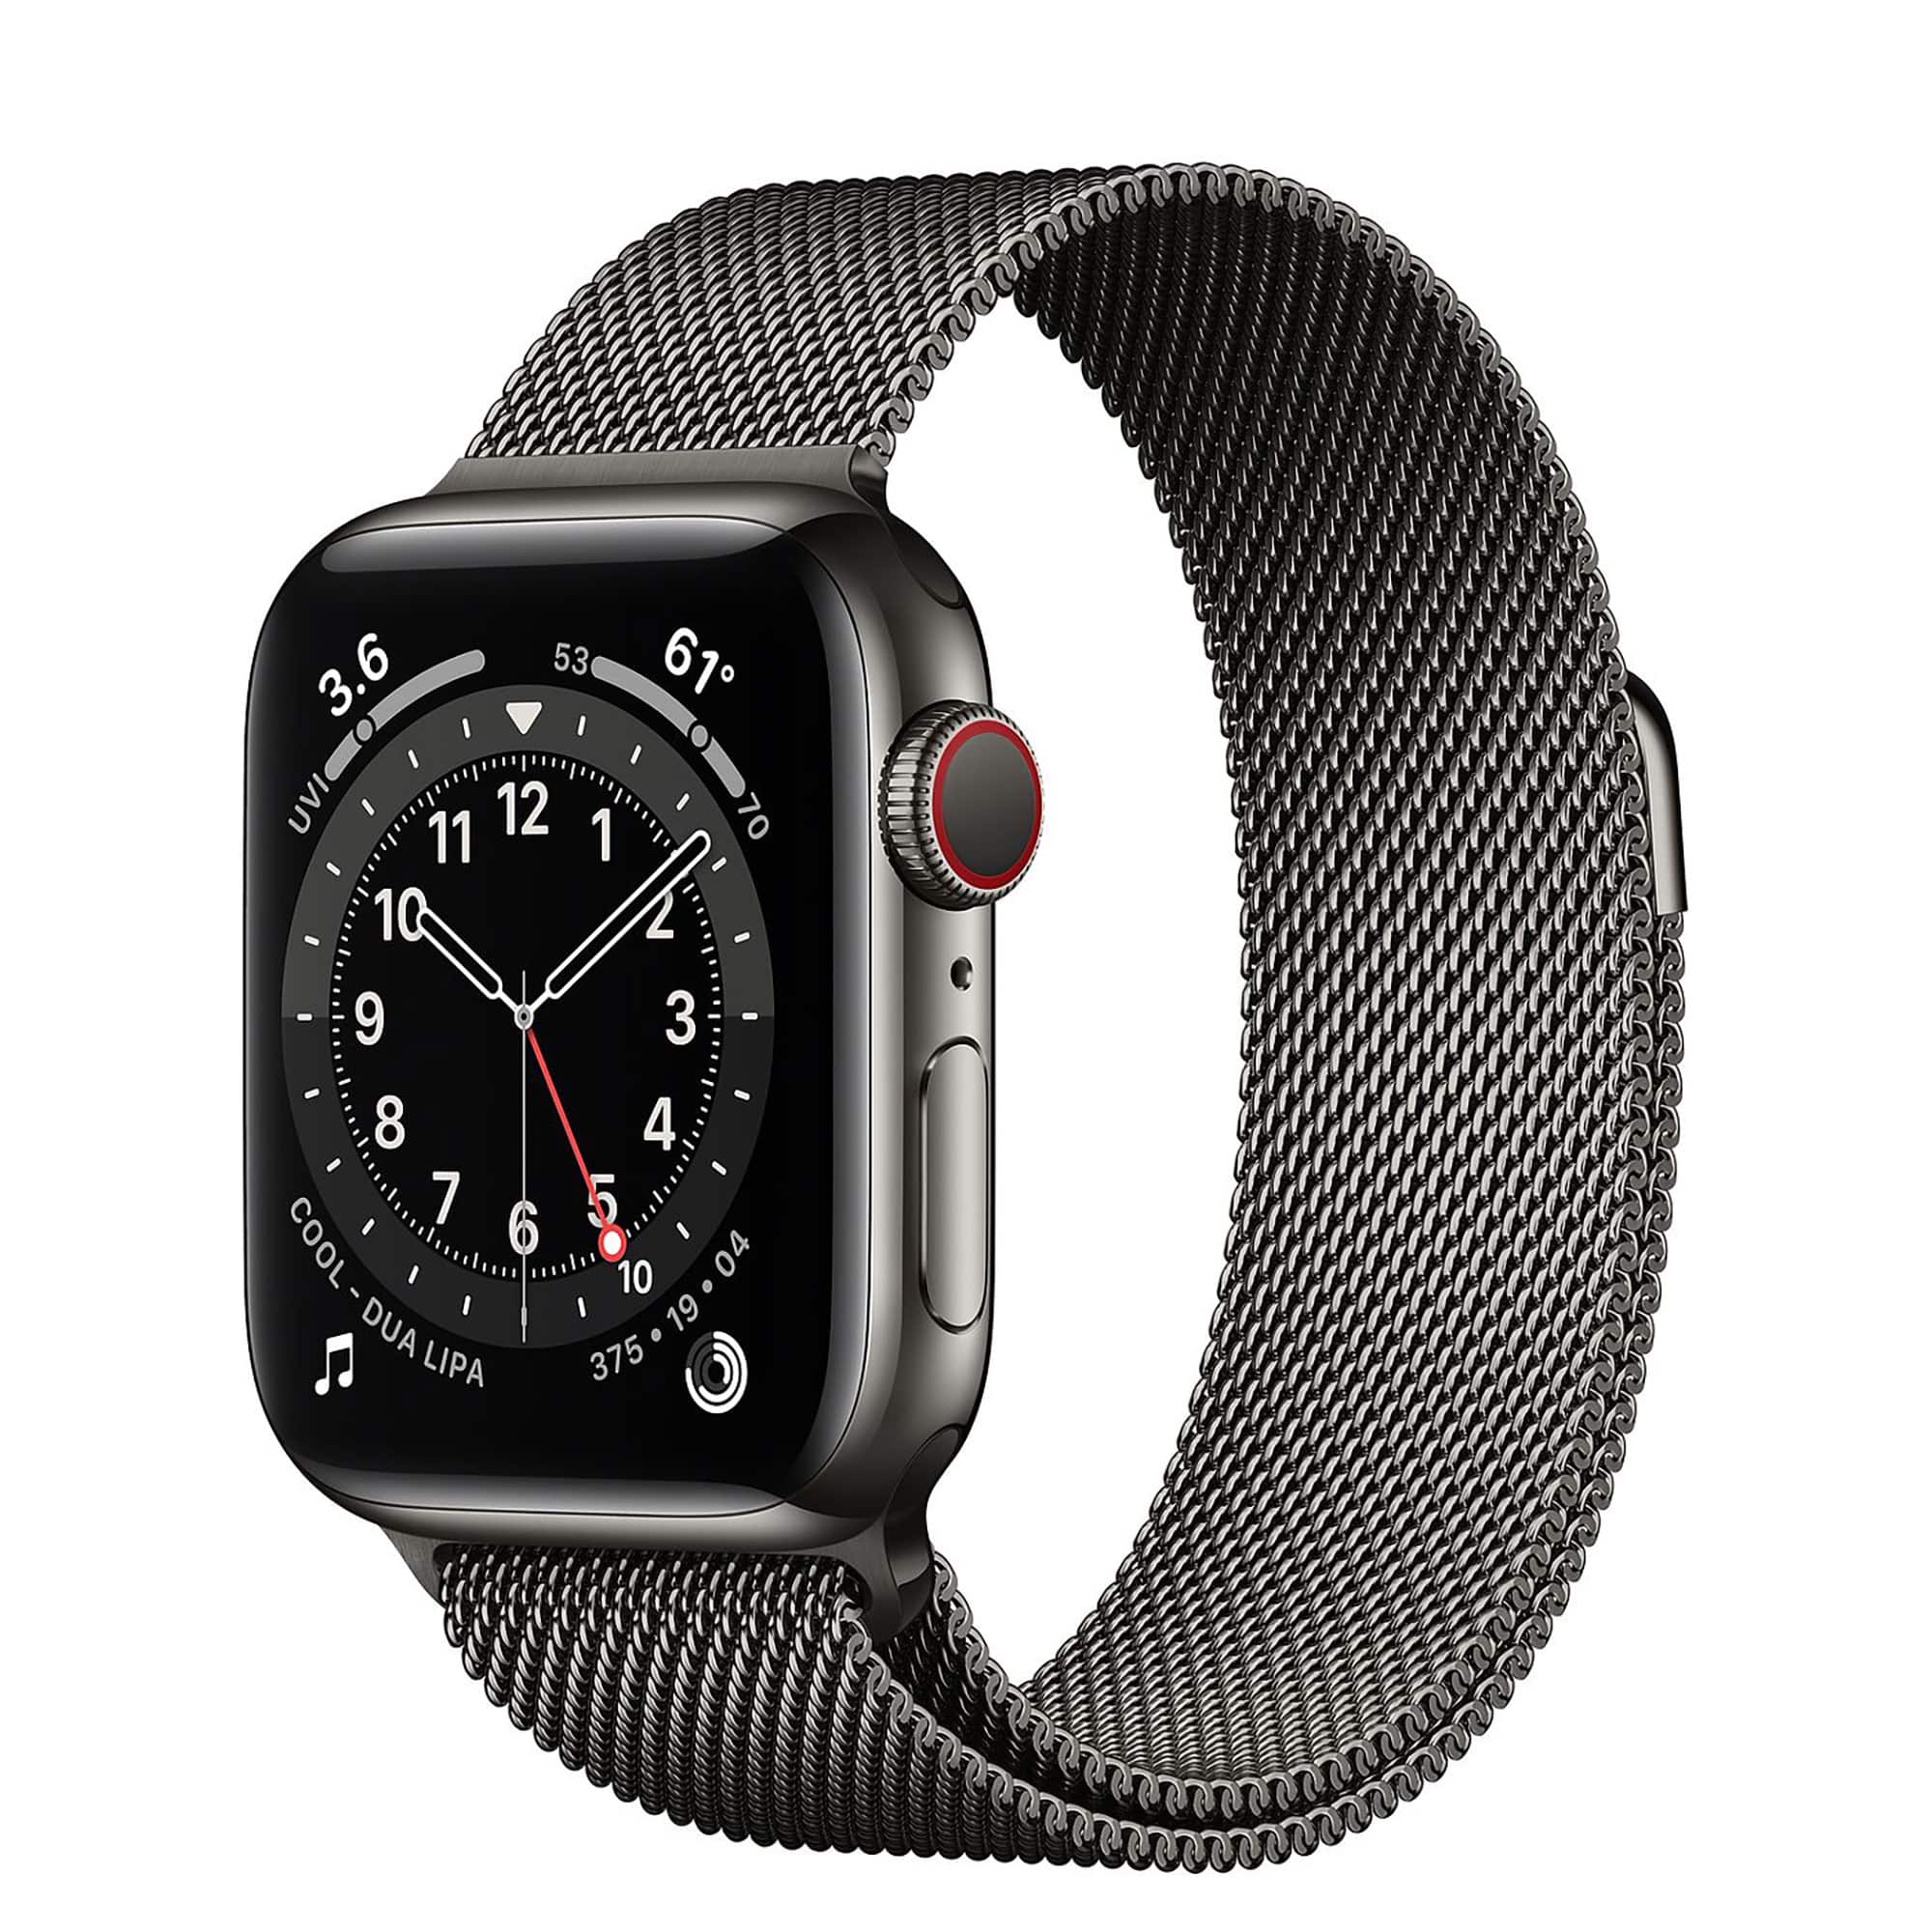 Graphite Stainless Steel Apple Watch